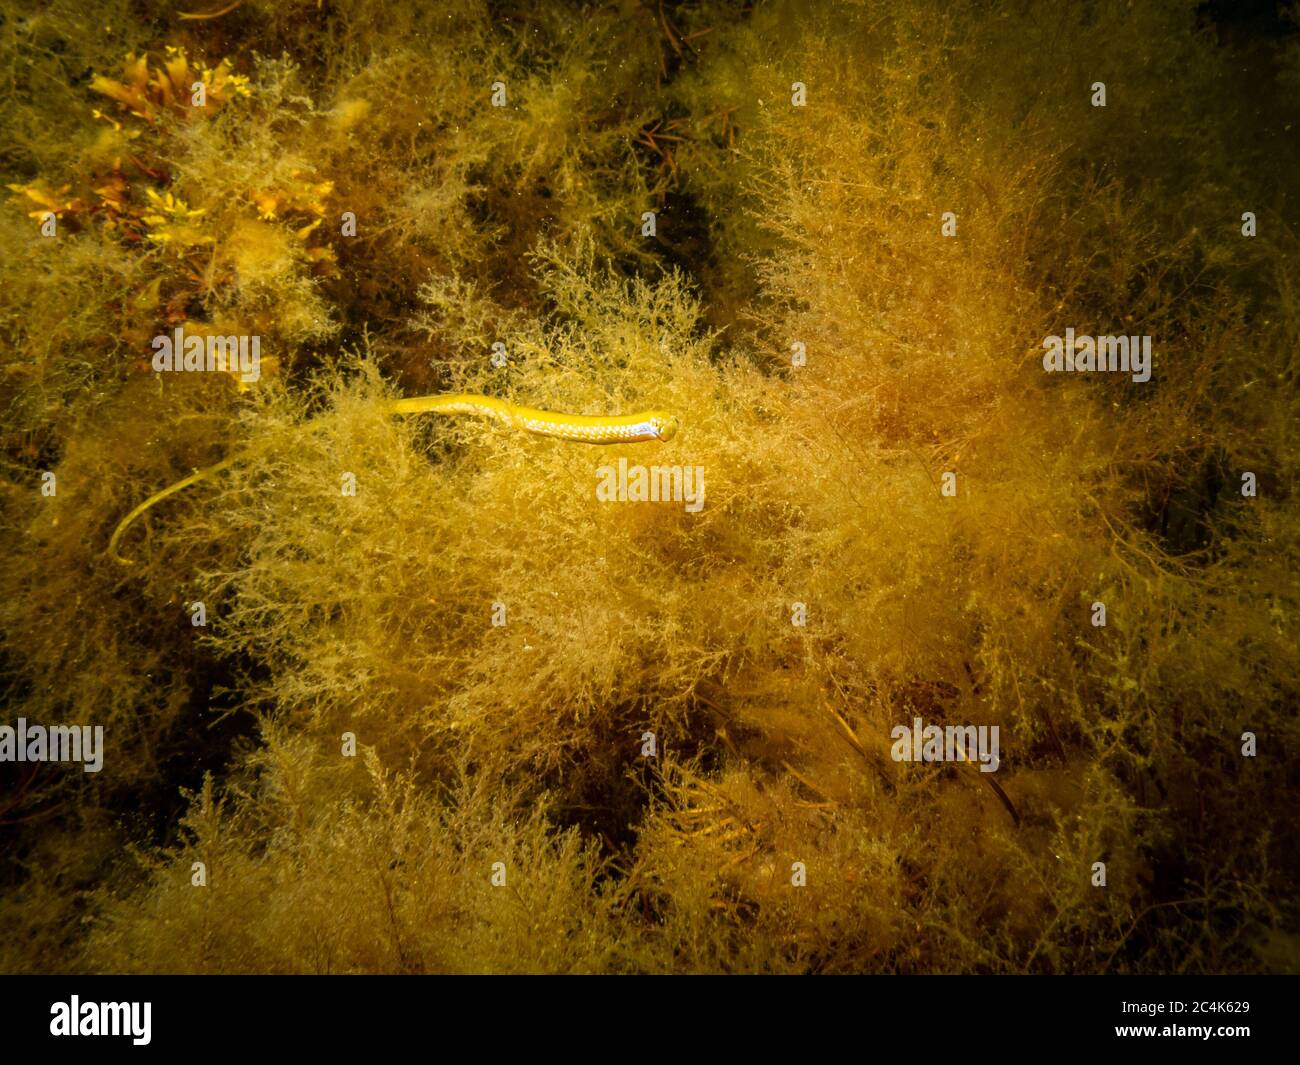 A yellow Straight-nose pipefish, Nerophis ophidion, in seaweed at On, Limhamn, Malmo, Sweden Stock Photo